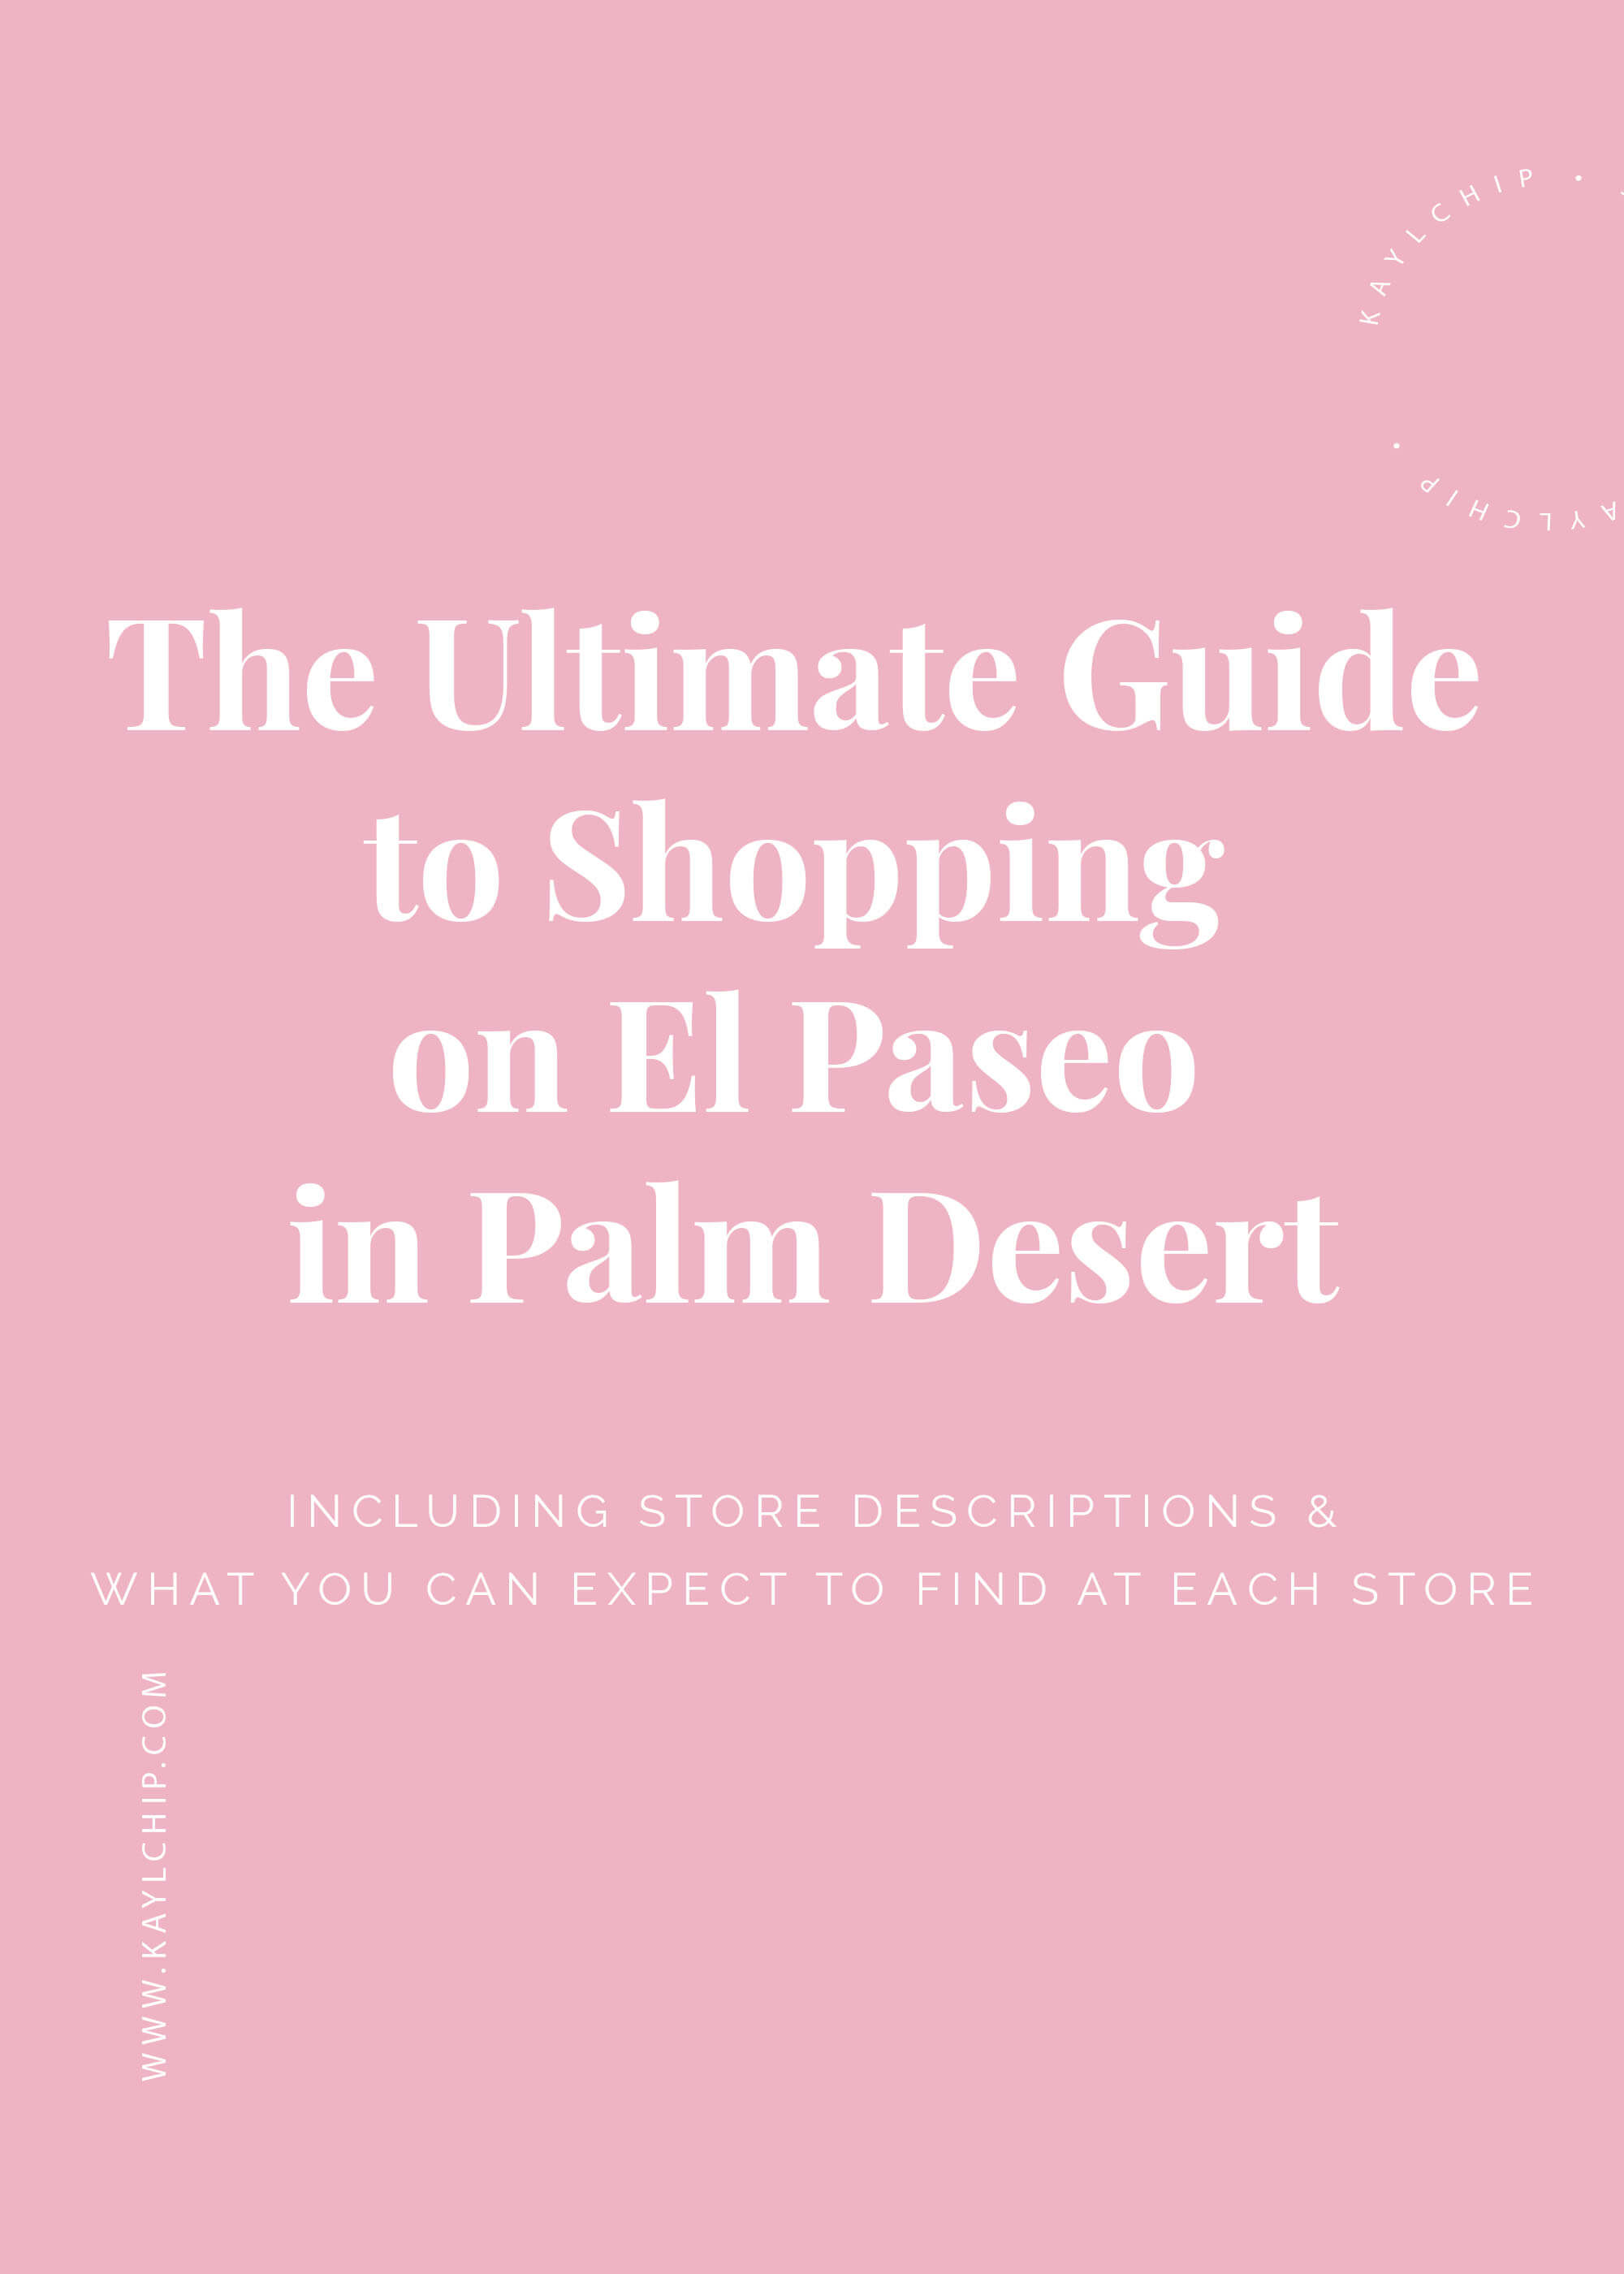 Gift Guide: Chic Under $75 – El Paseo Catalogue – Palm Desert